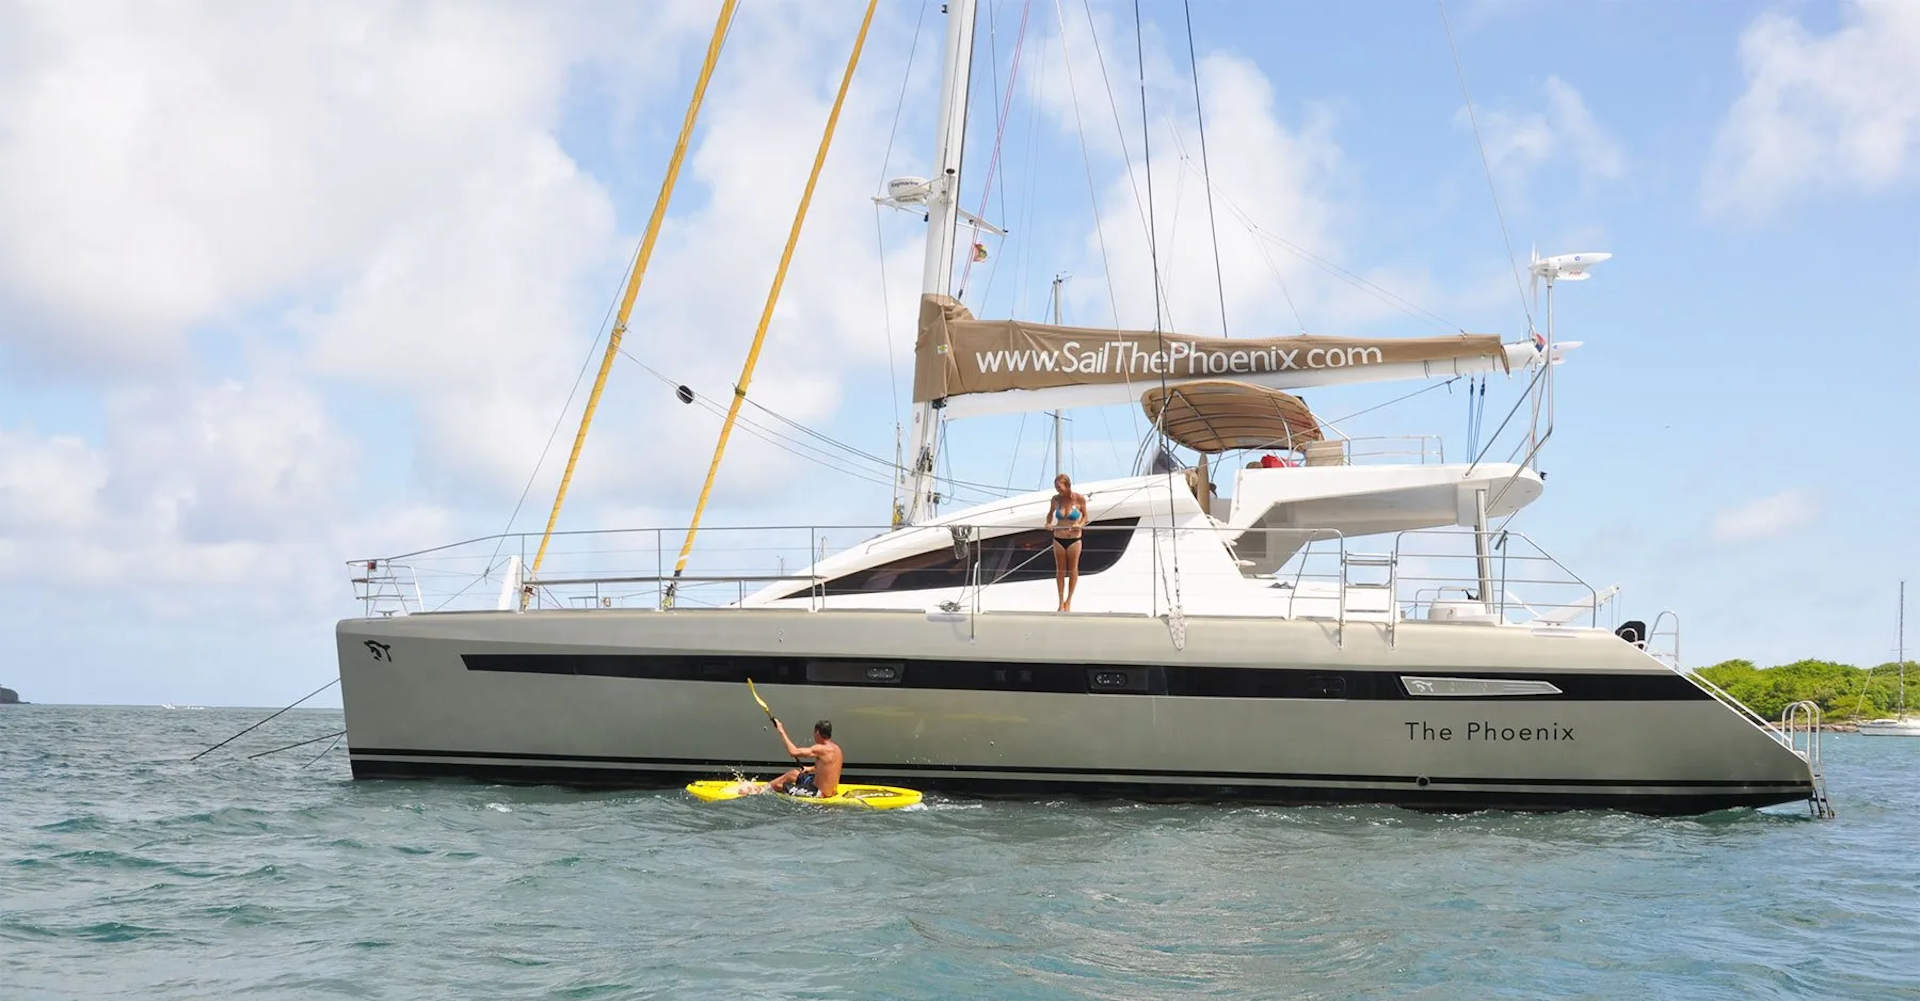 Sailing Excursions on St. Maarten